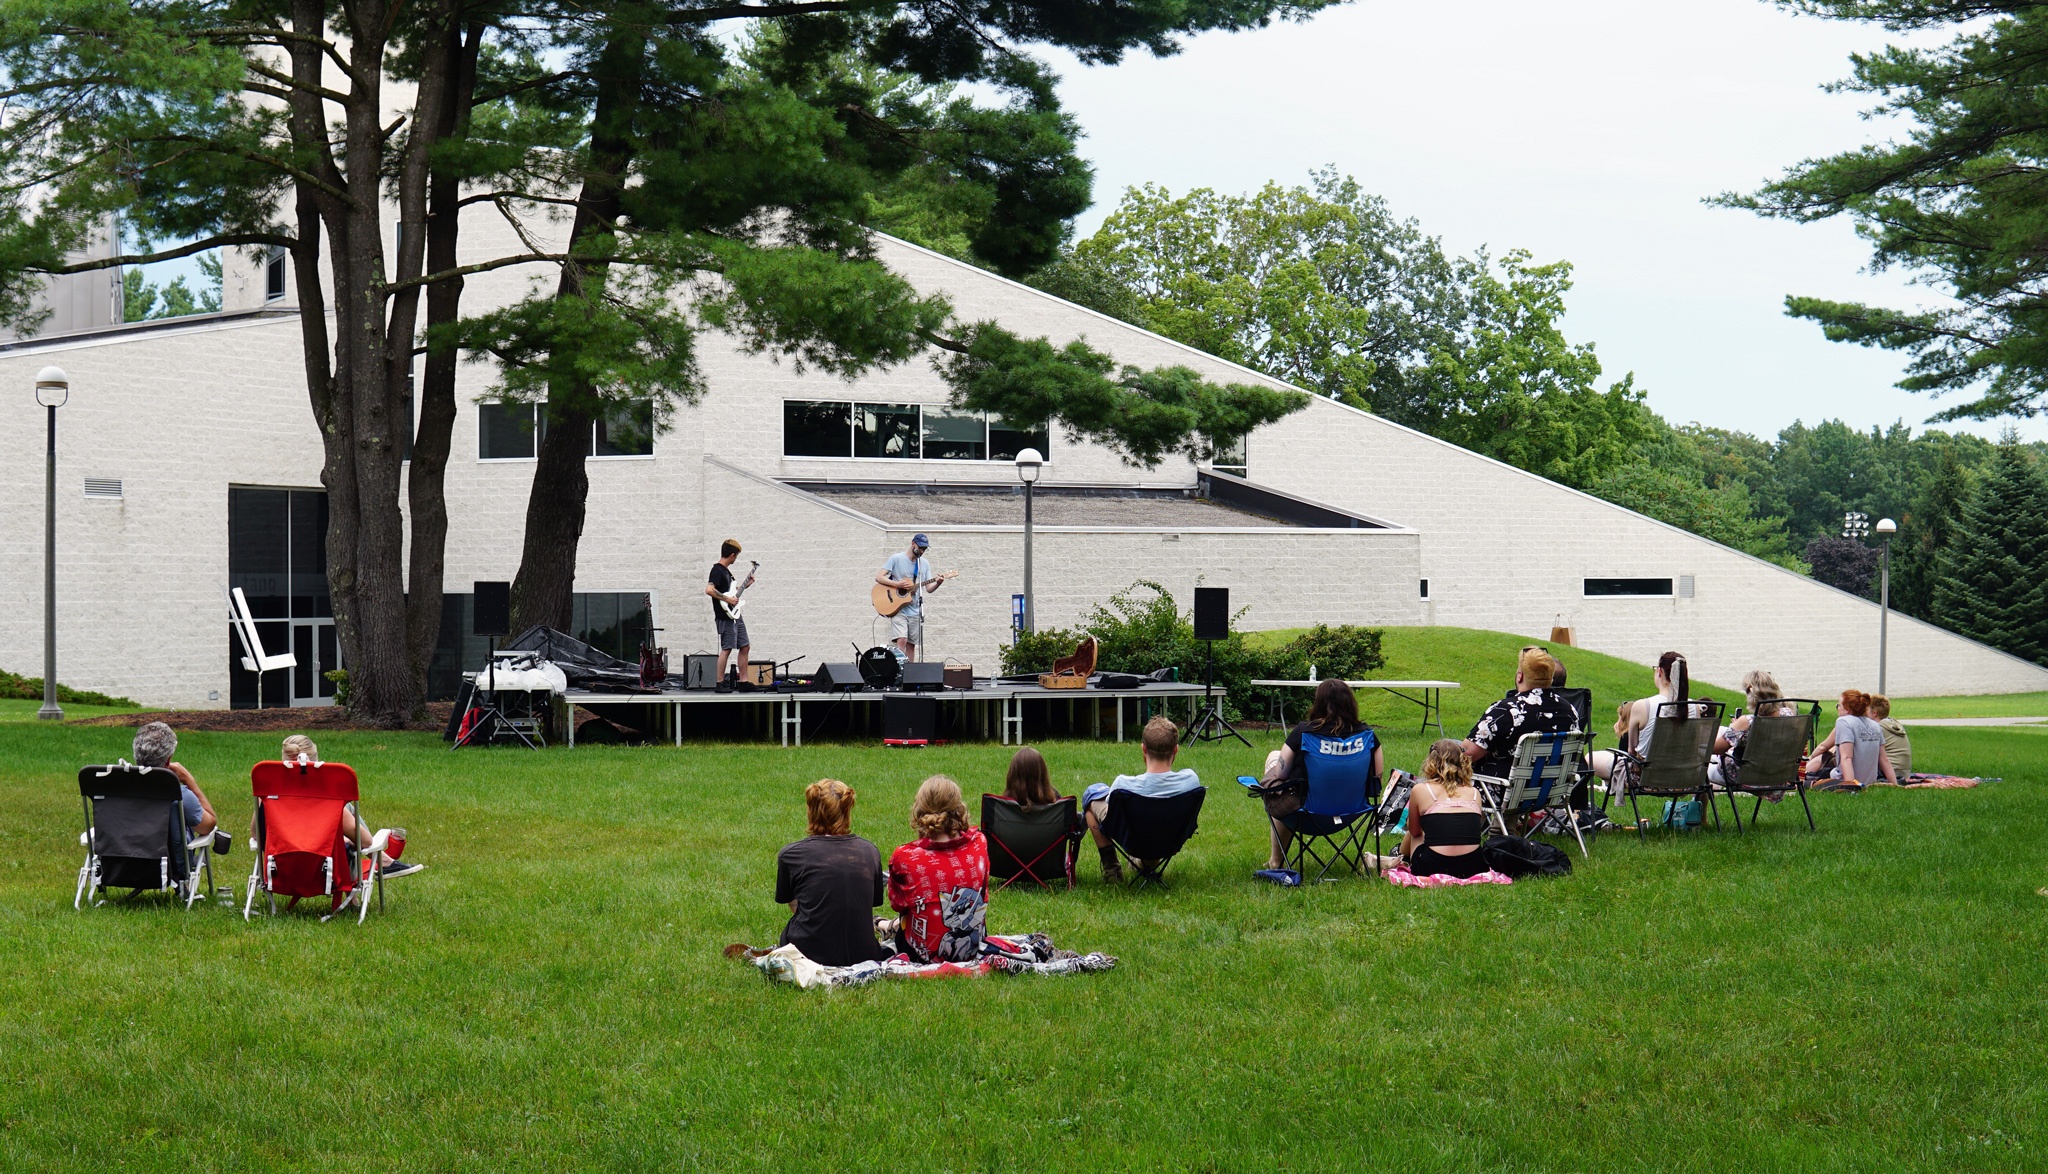 A small group of people sit on blankets and in lawn chairs in front of a small outdoor stage on which two people stand playing guitar.